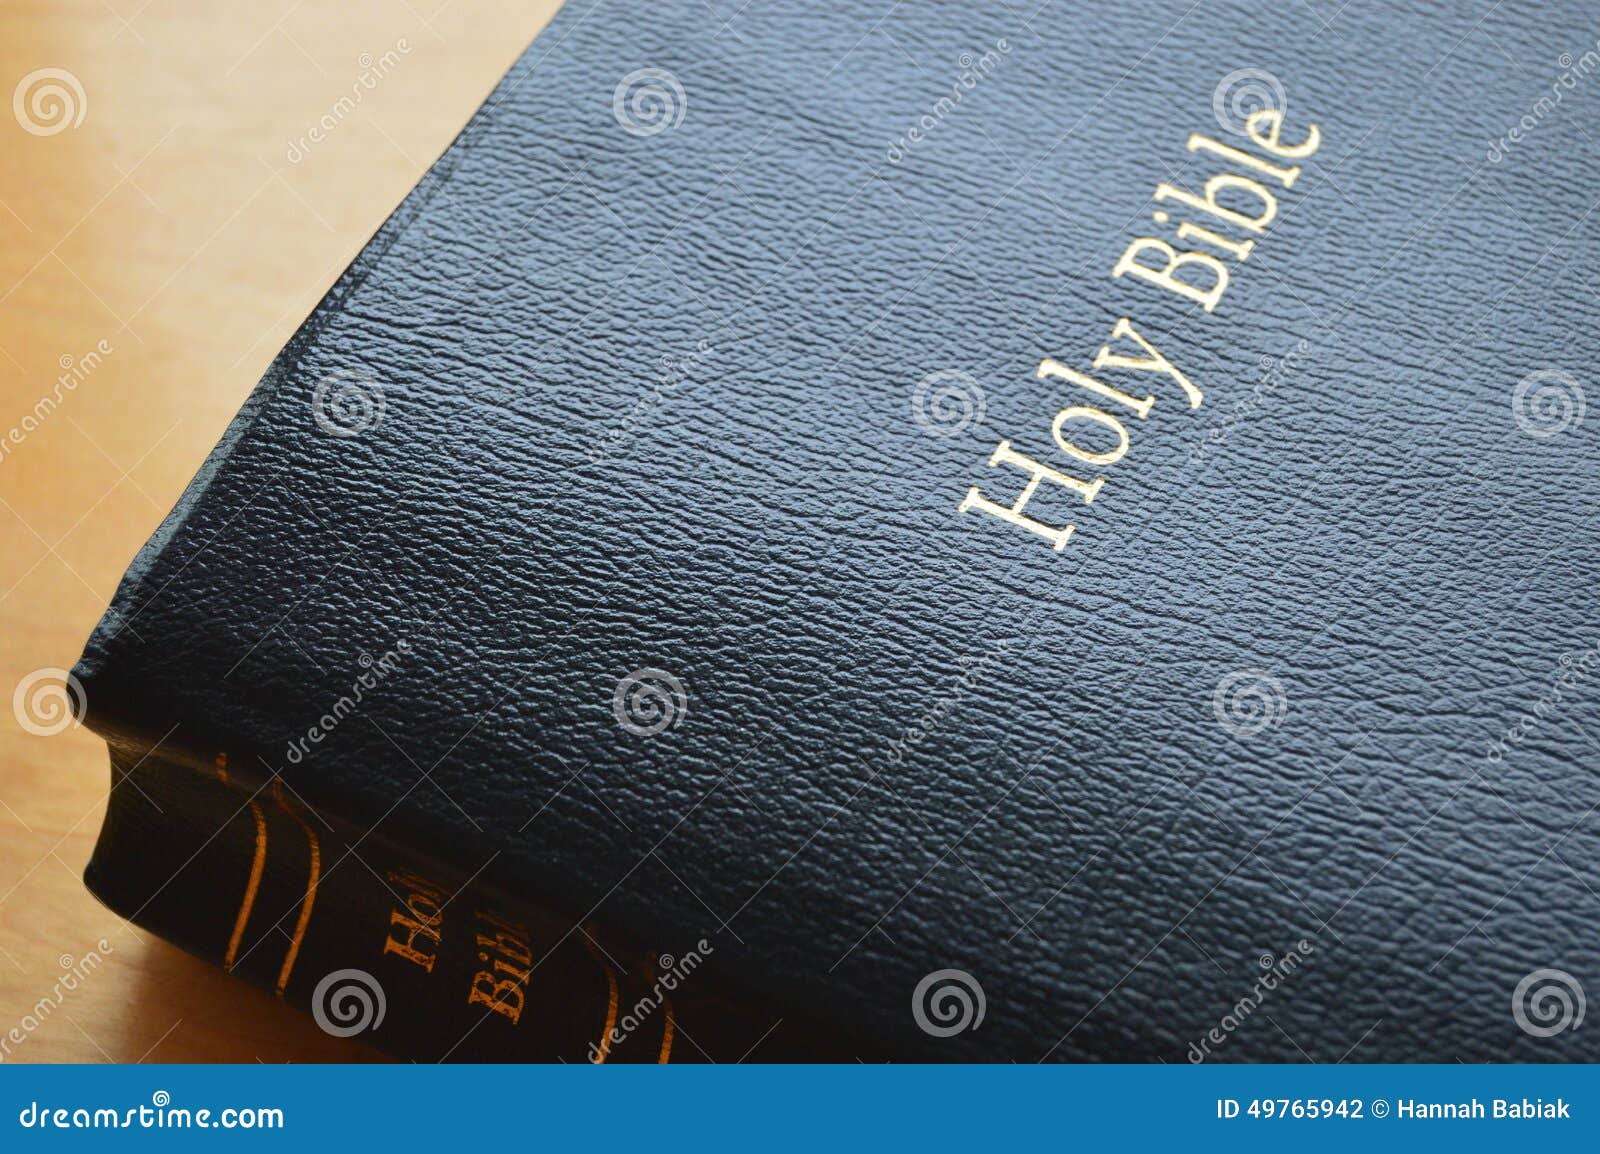 black leather holy bible